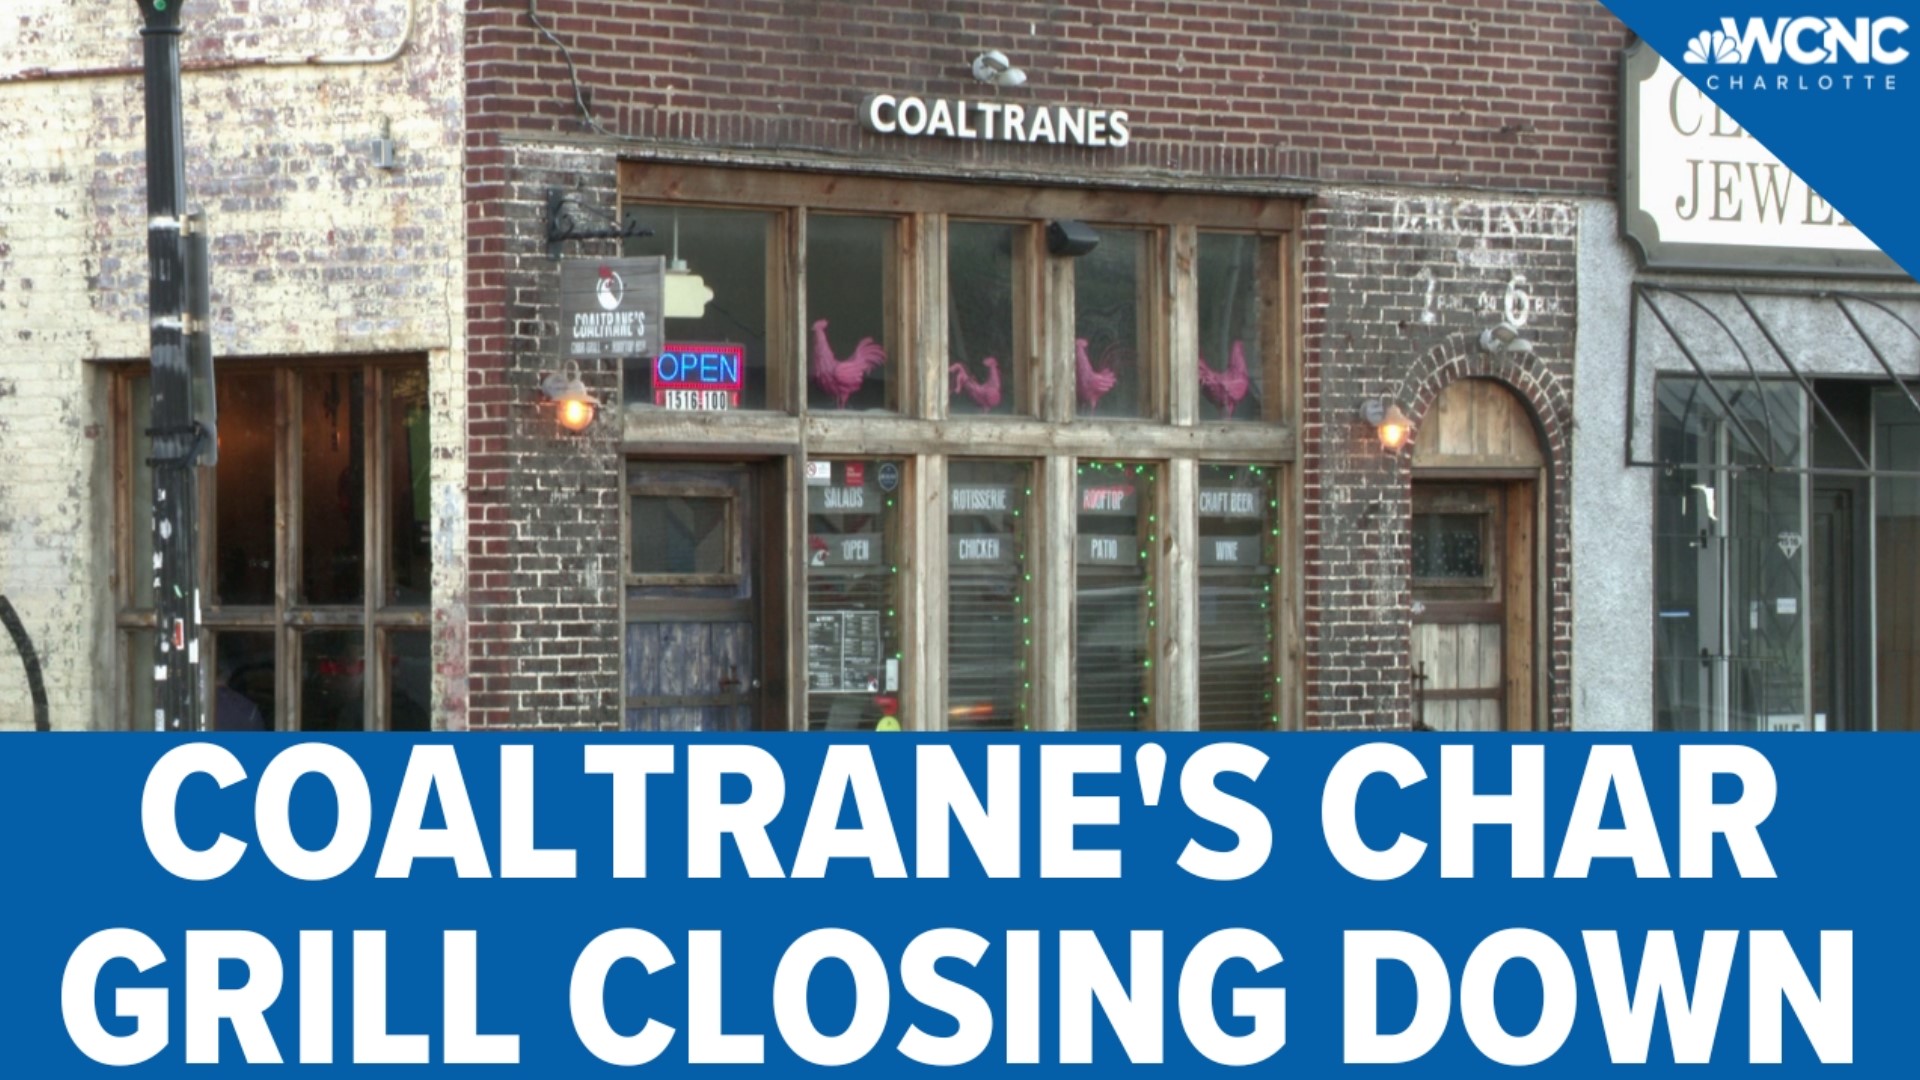 After five years of serving customers in the Plaza Midwood neighborhood, Coaltrane's Char Grill is making its last call Tuesday night.